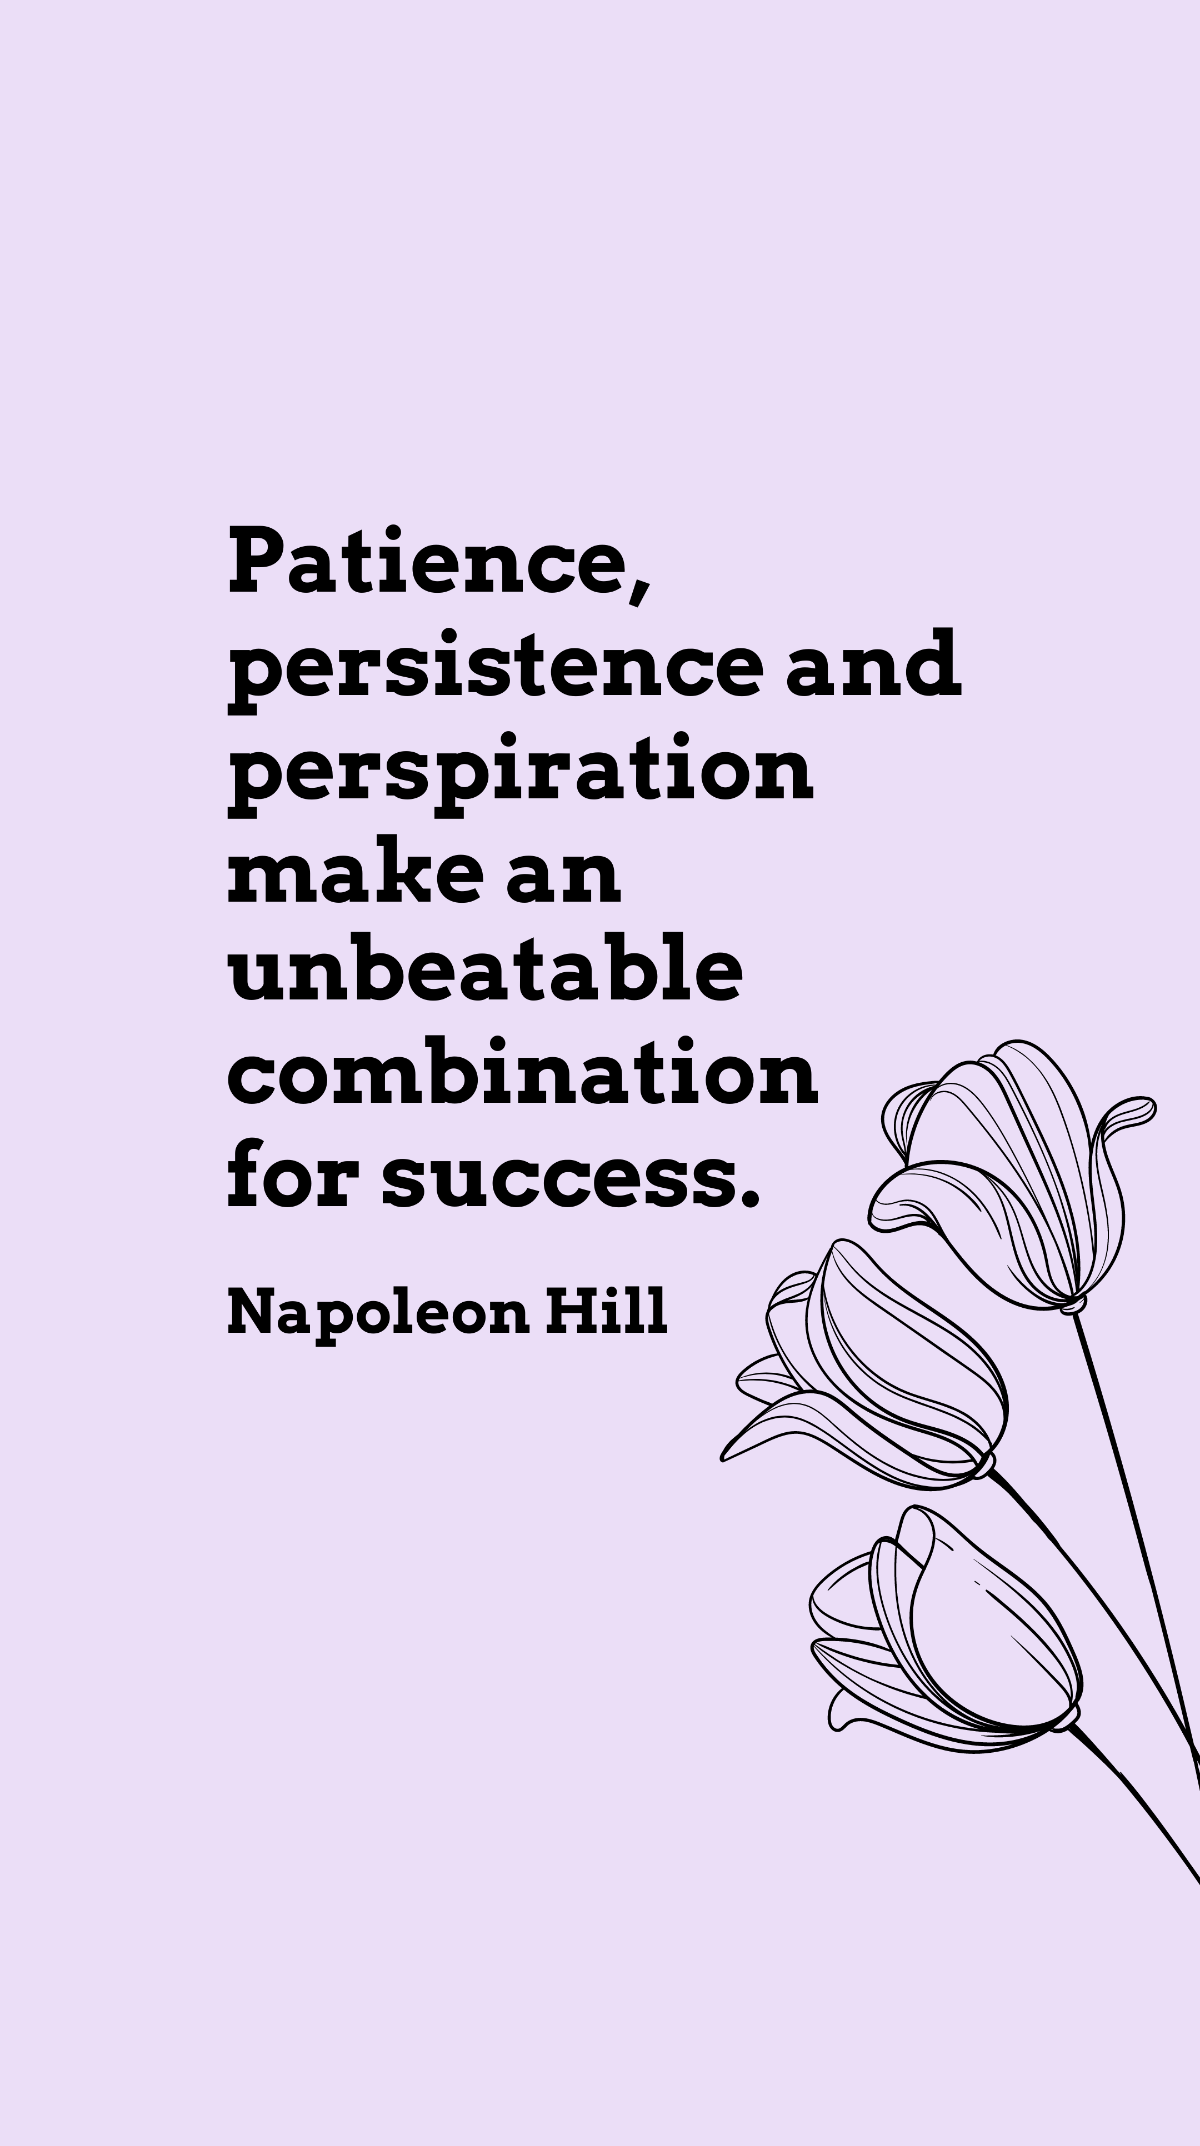 Napoleon Hill - Patience, persistence and perspiration make an unbeatable combination for success.